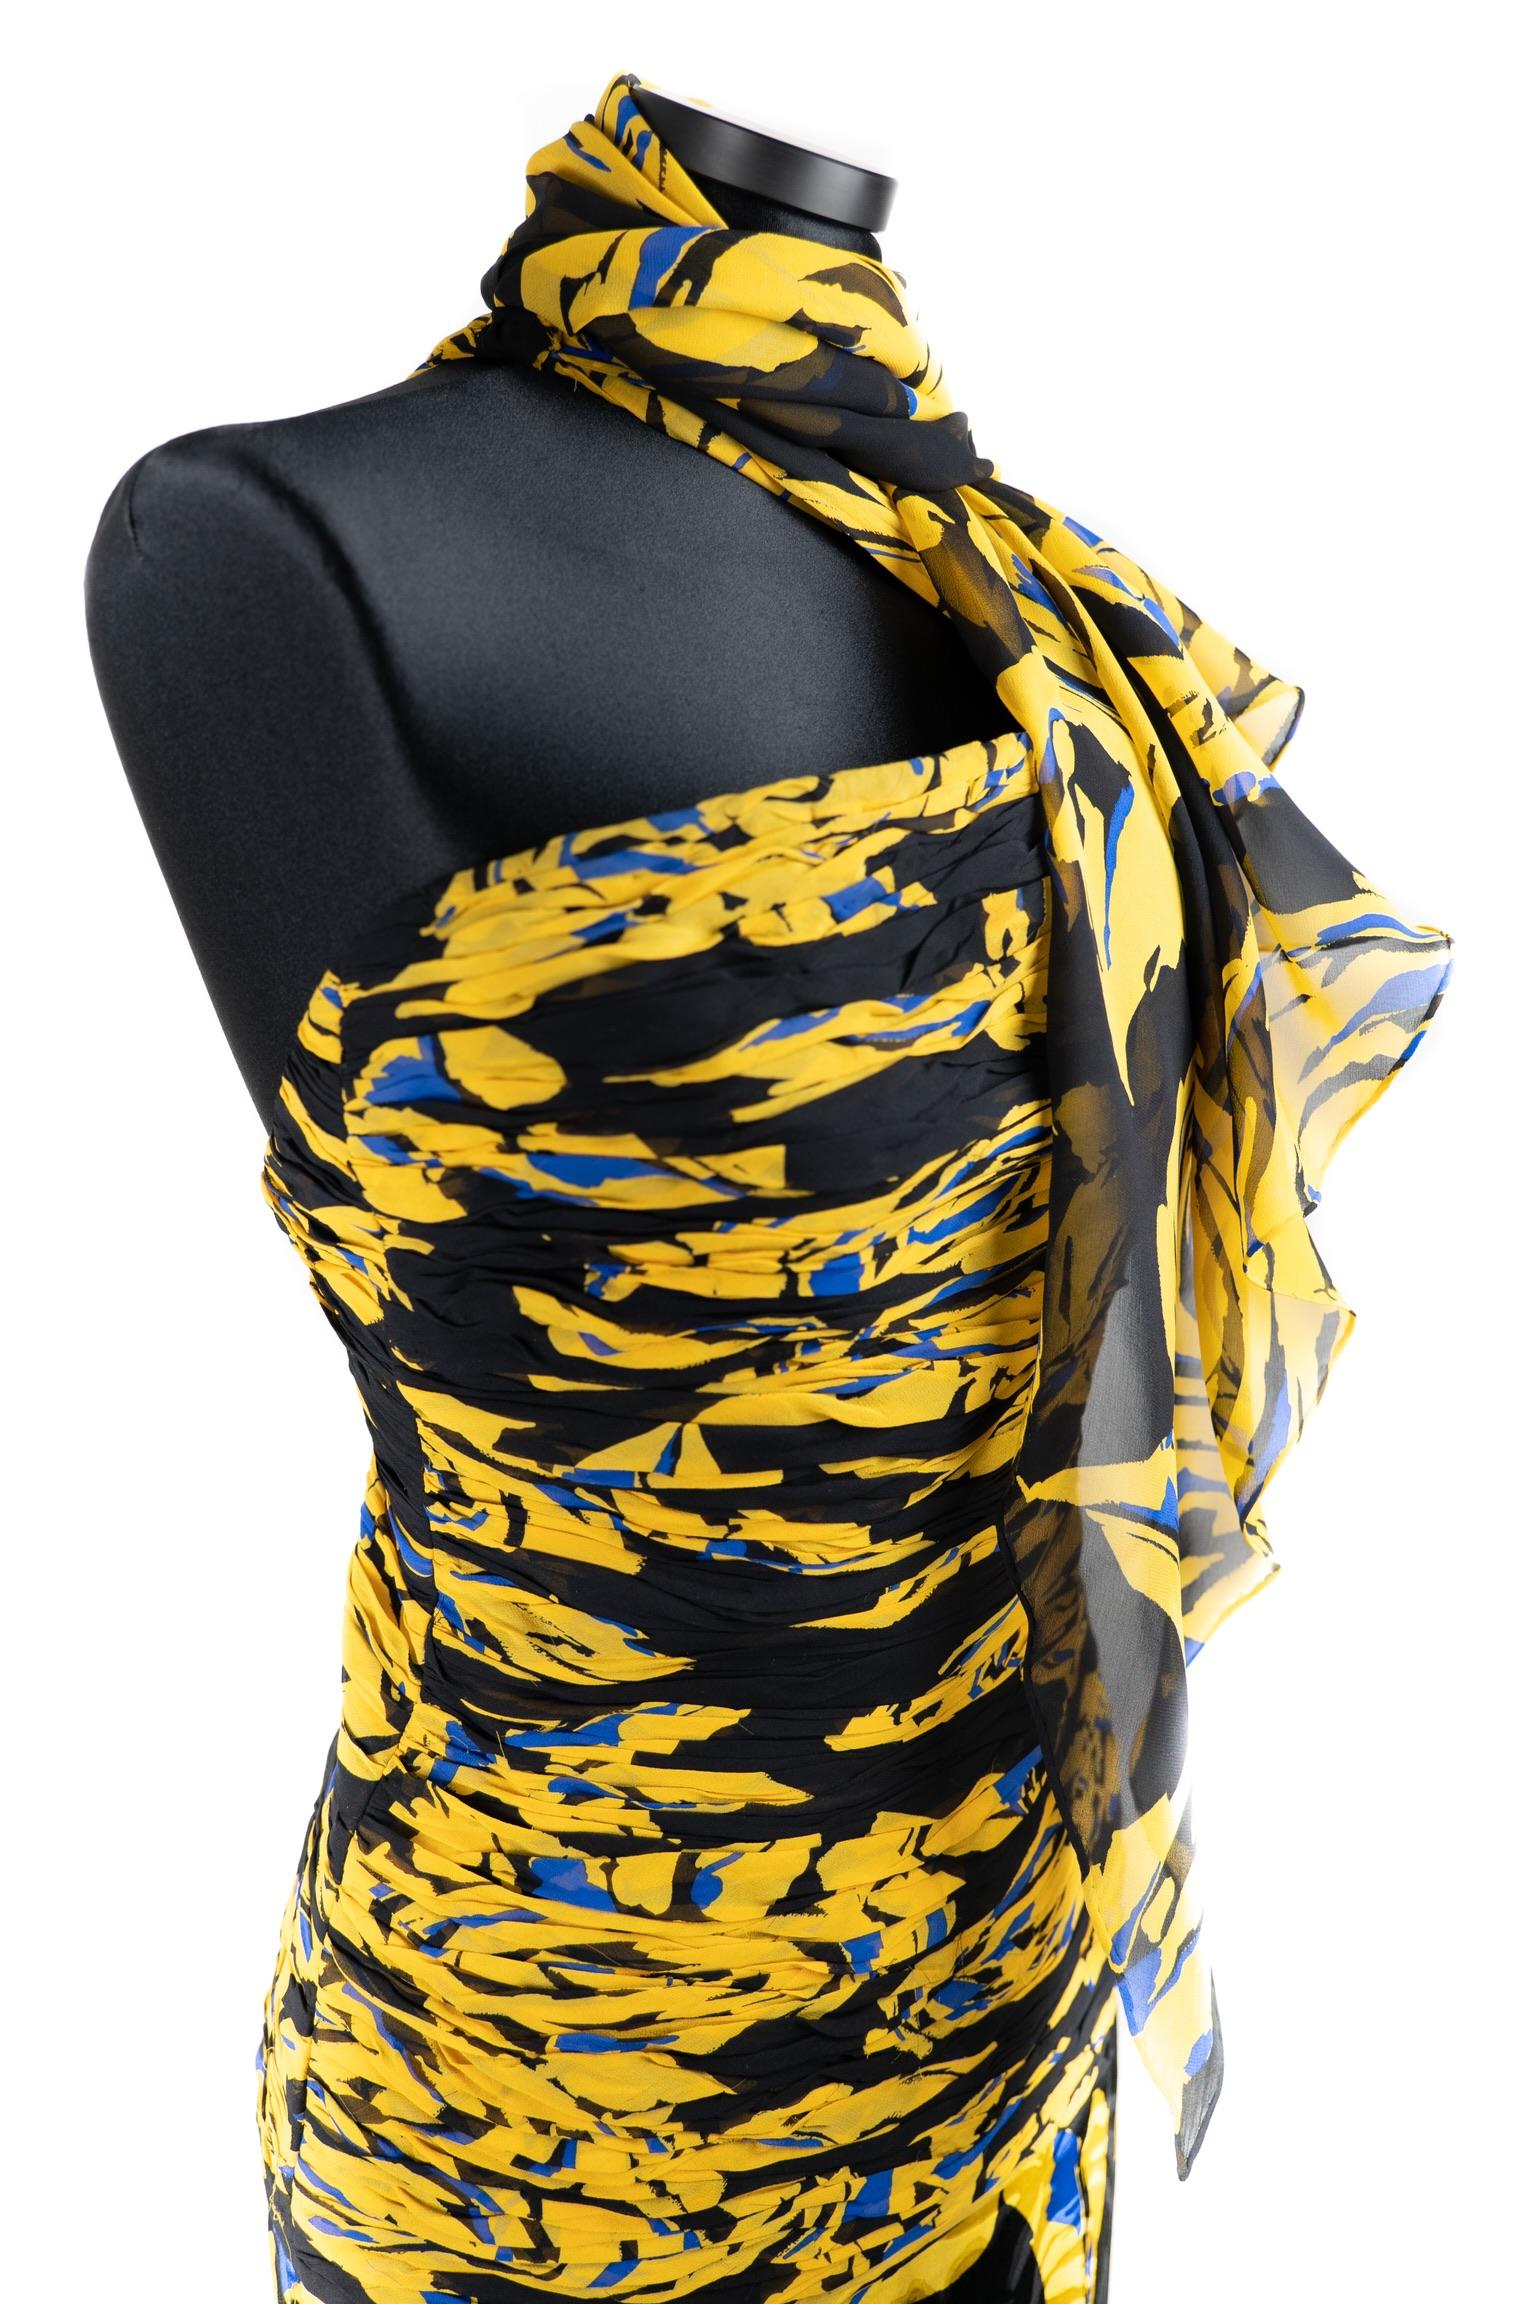 Valentino Boutique Night Dress plus scarf en pendant. Circa 1979.
The composition and size labels are missing.
This Valentino dress is made from a double layered silk chiffon designed with a rose print of blue, goldenrod, and black. The bodice of